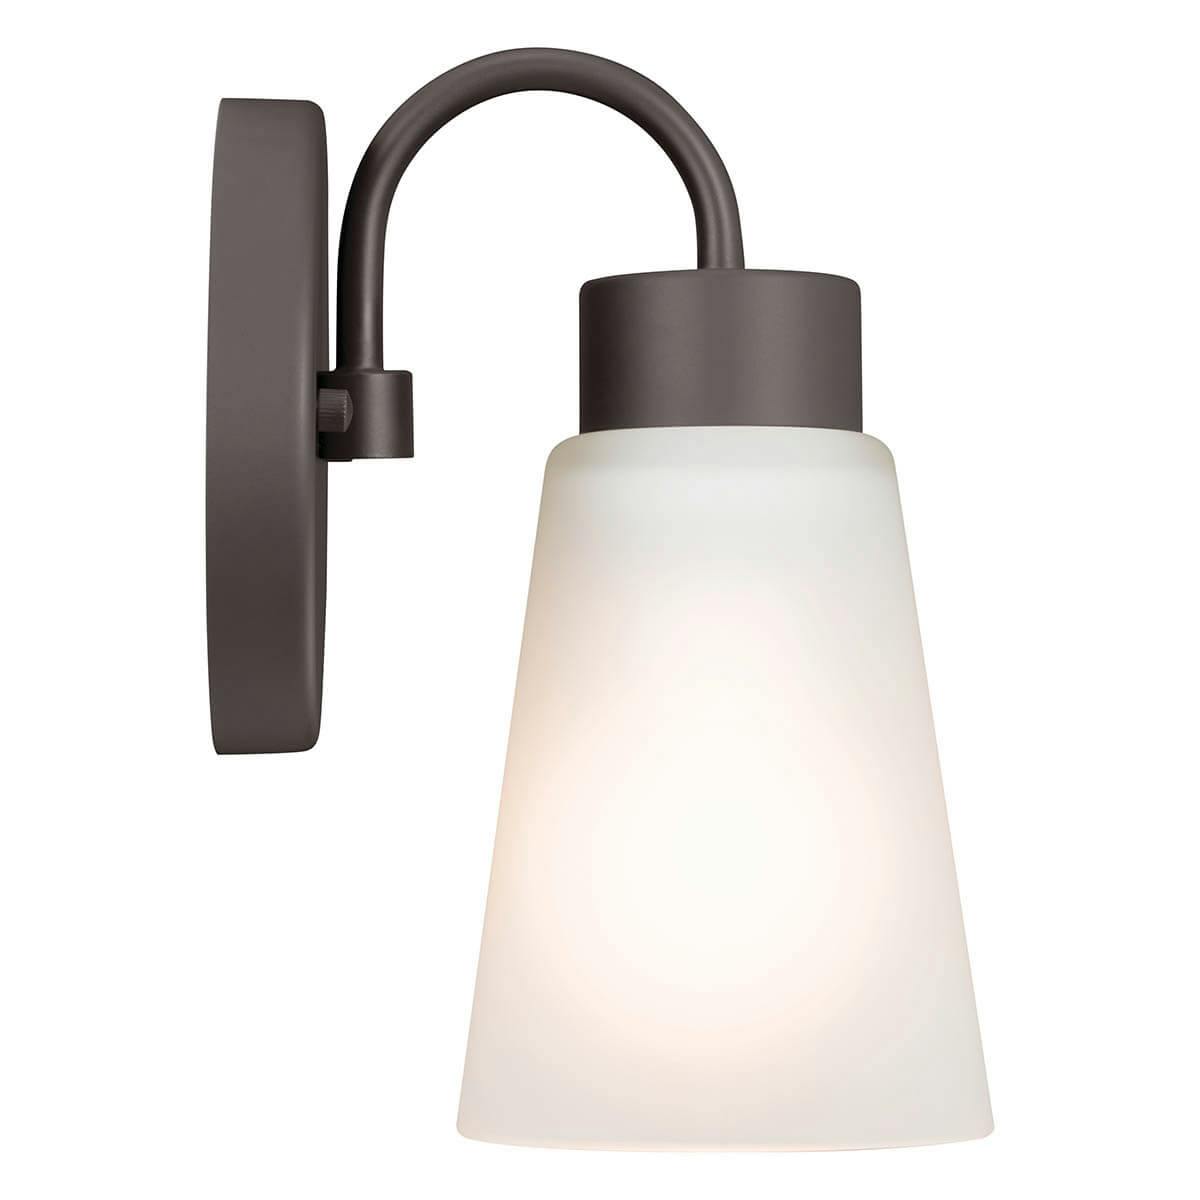 Profile view of the Erma 4.25" Wall Sconce Olde Bronze on a white background